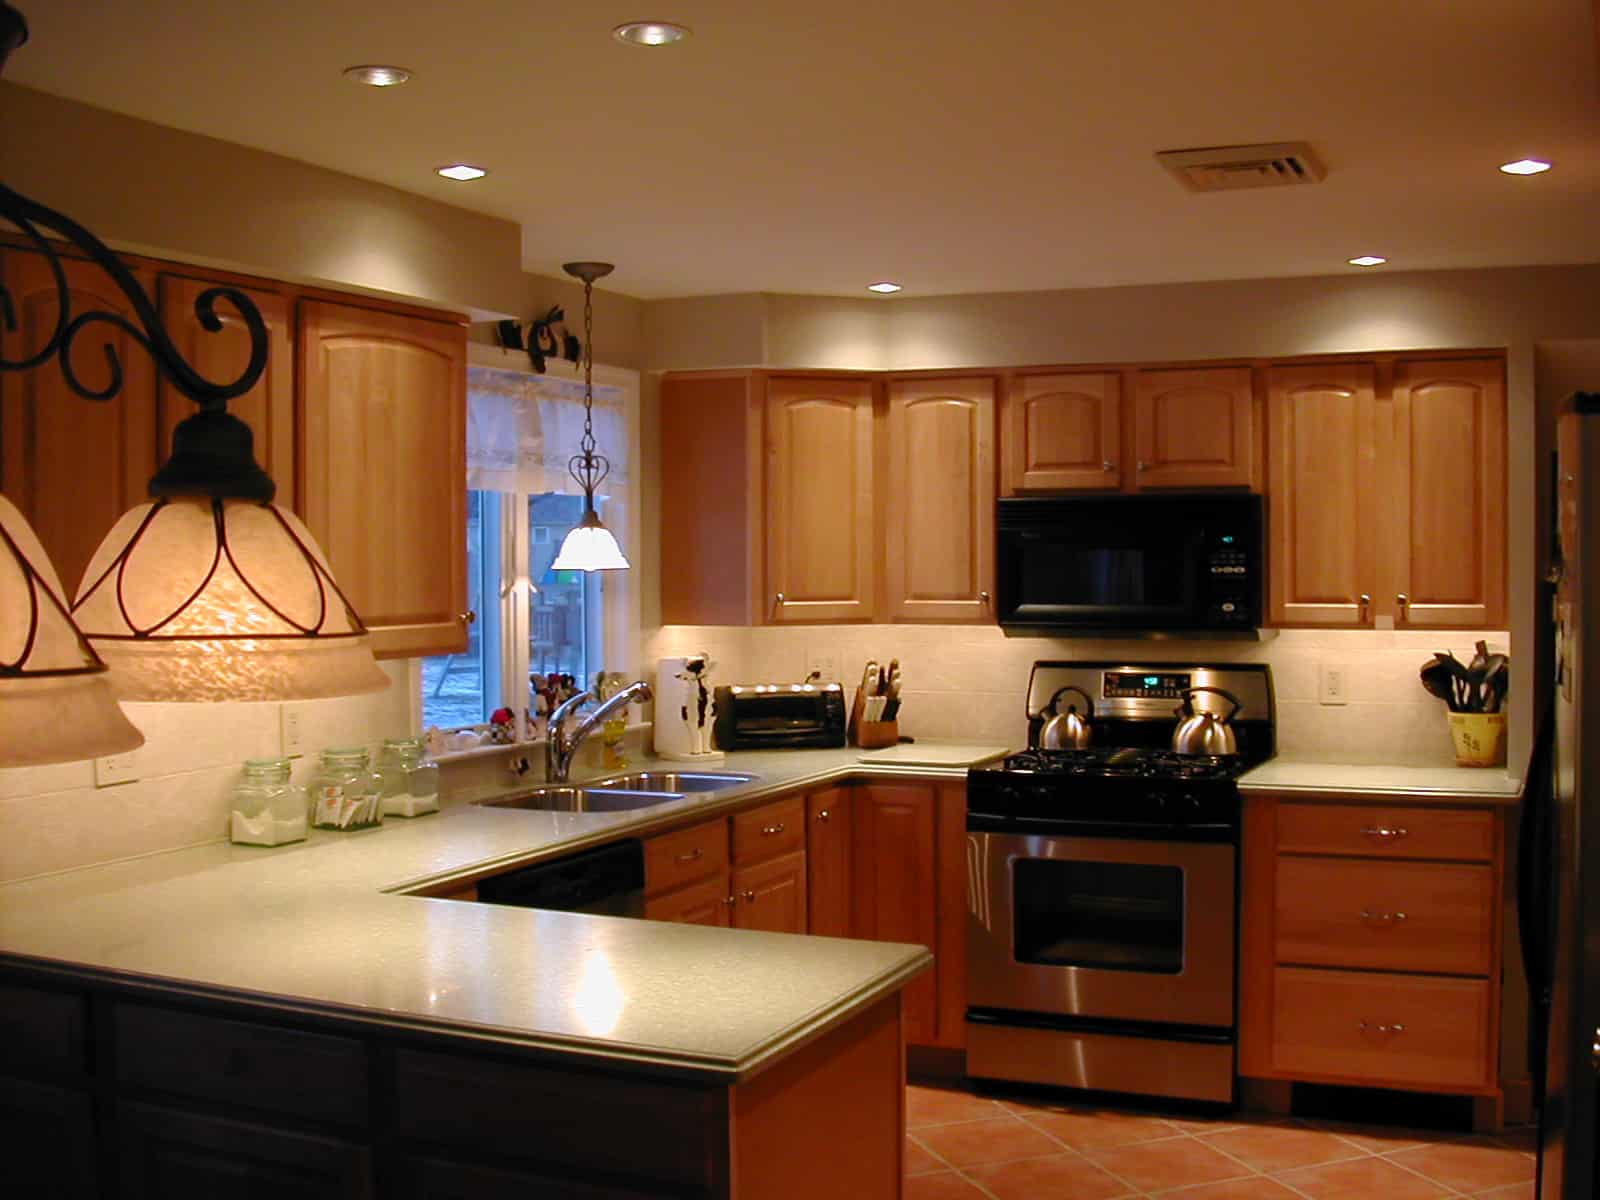 lighting a small kitchen